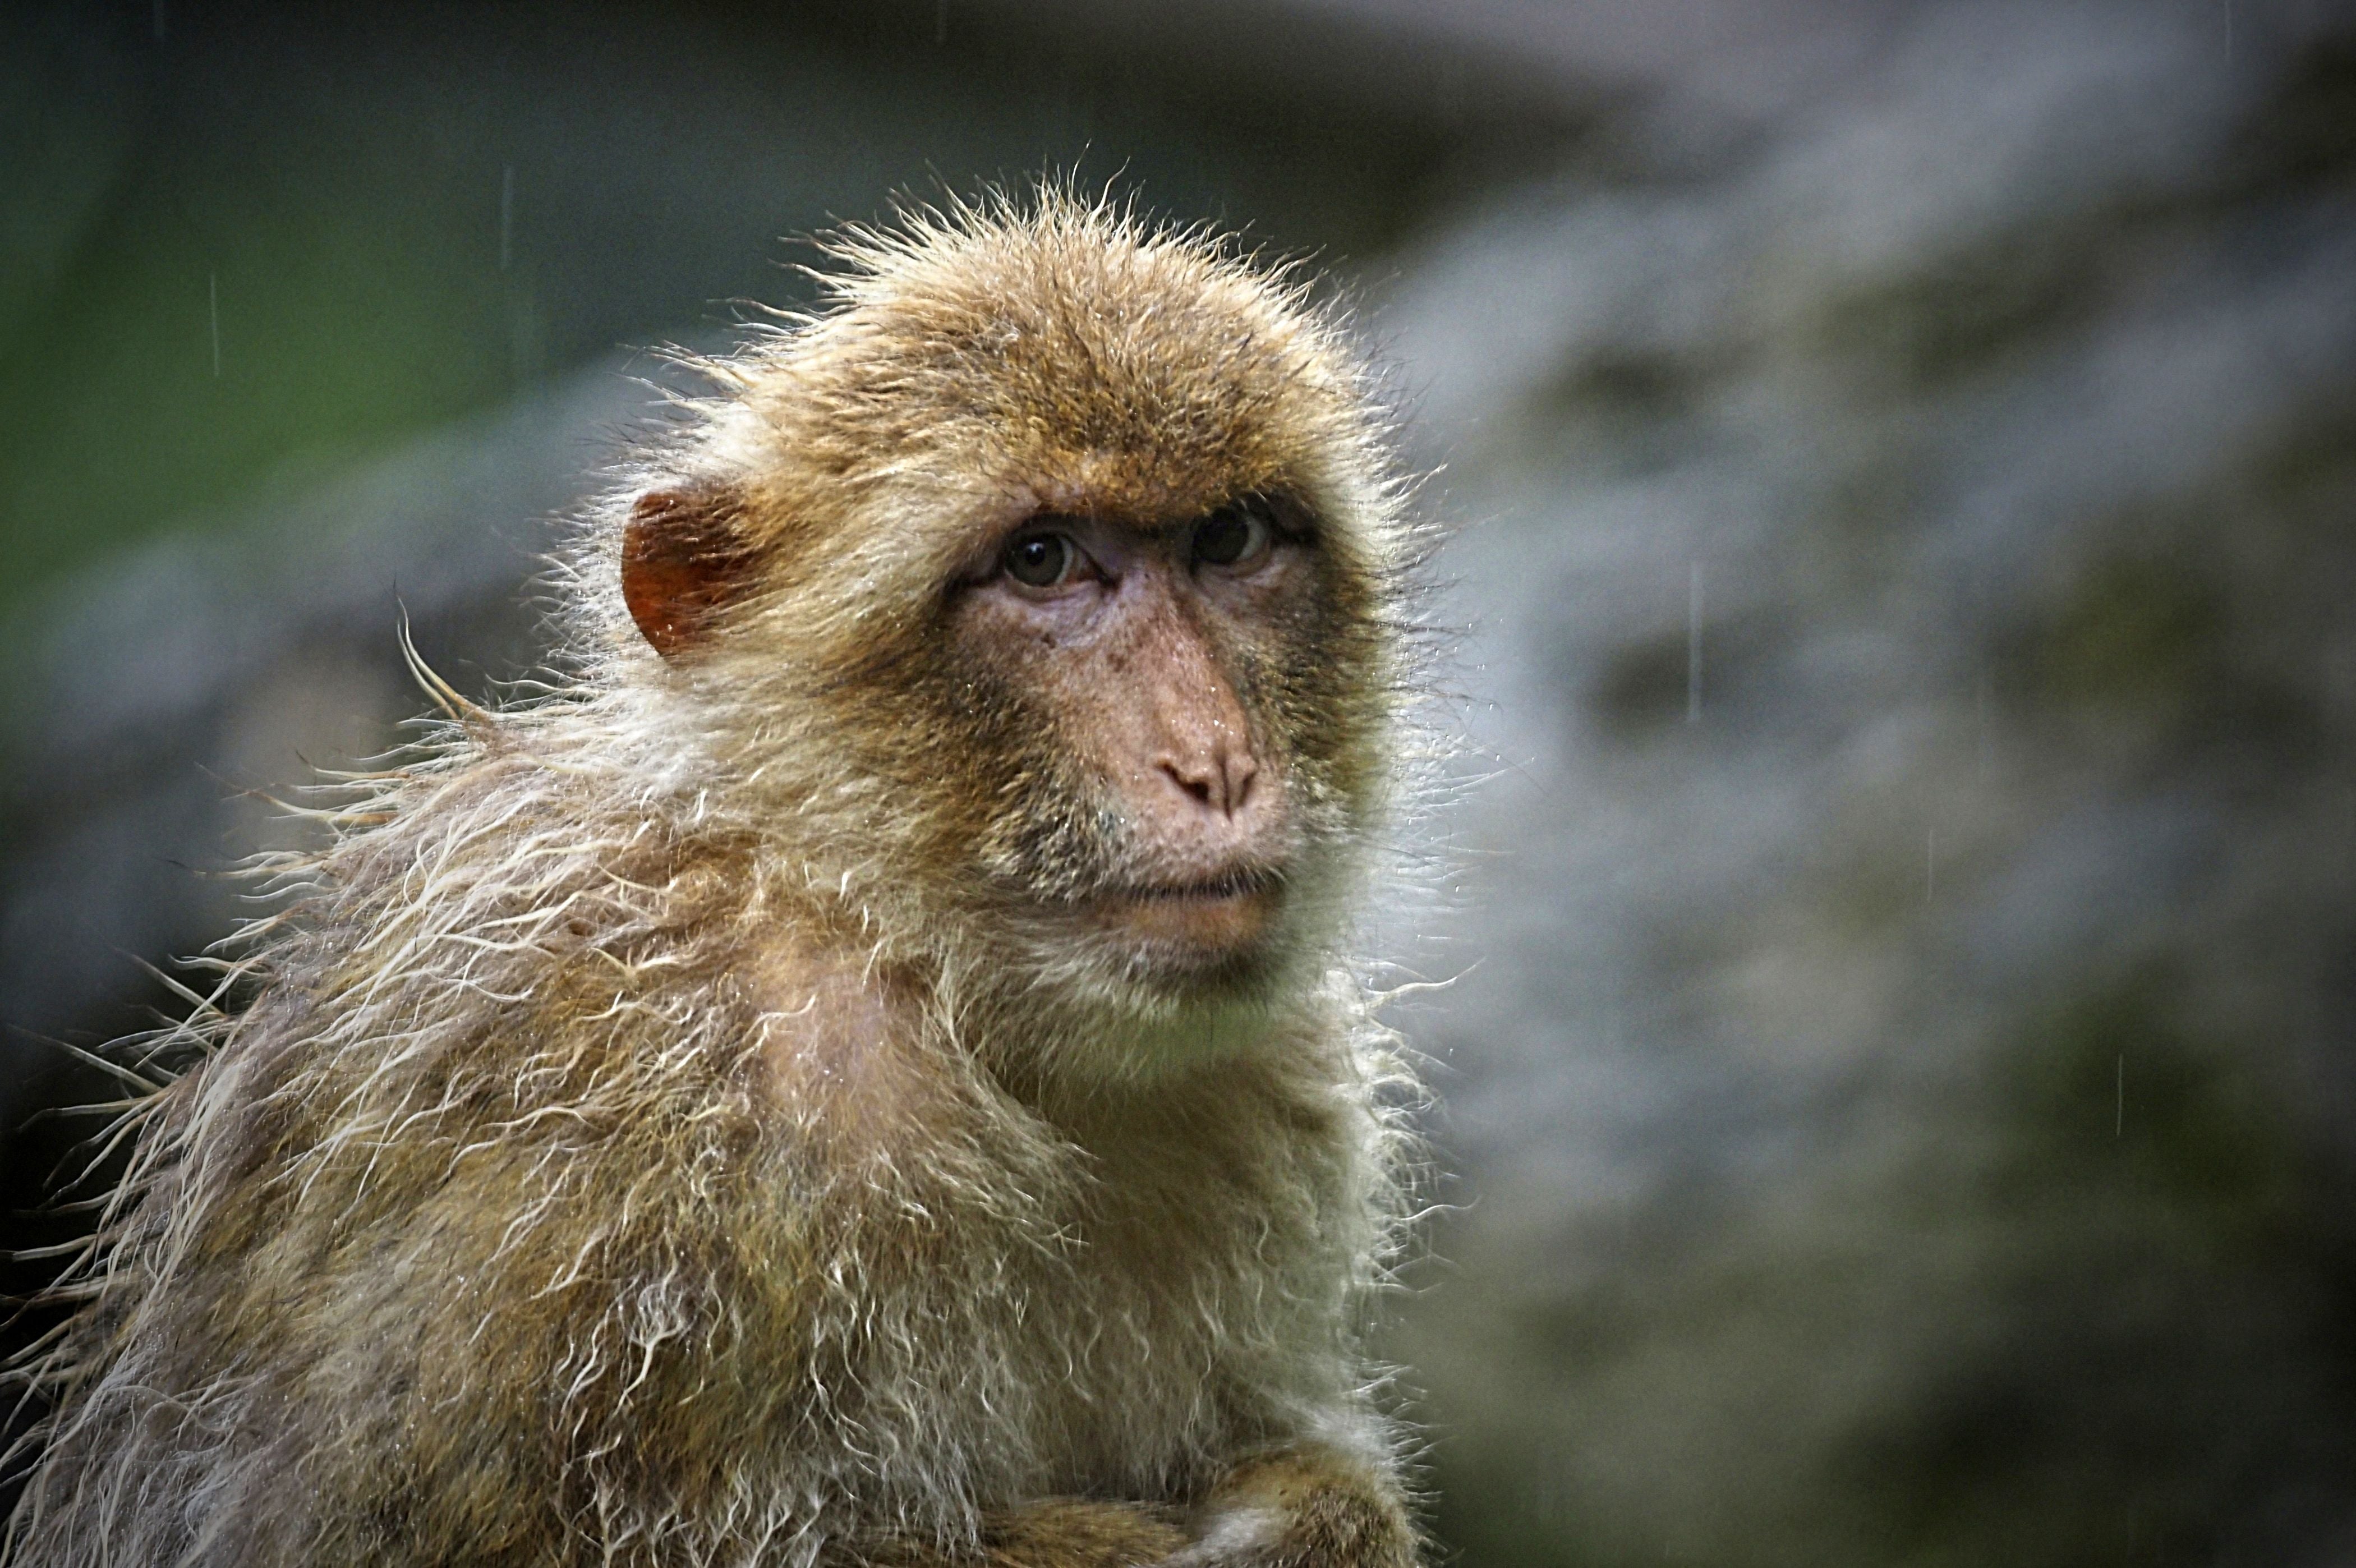 Representational: Monkey B virus, or herpes B virus is prevalent among macaque monkeys and is extremely rare, but often deadly, when it spreads to humans